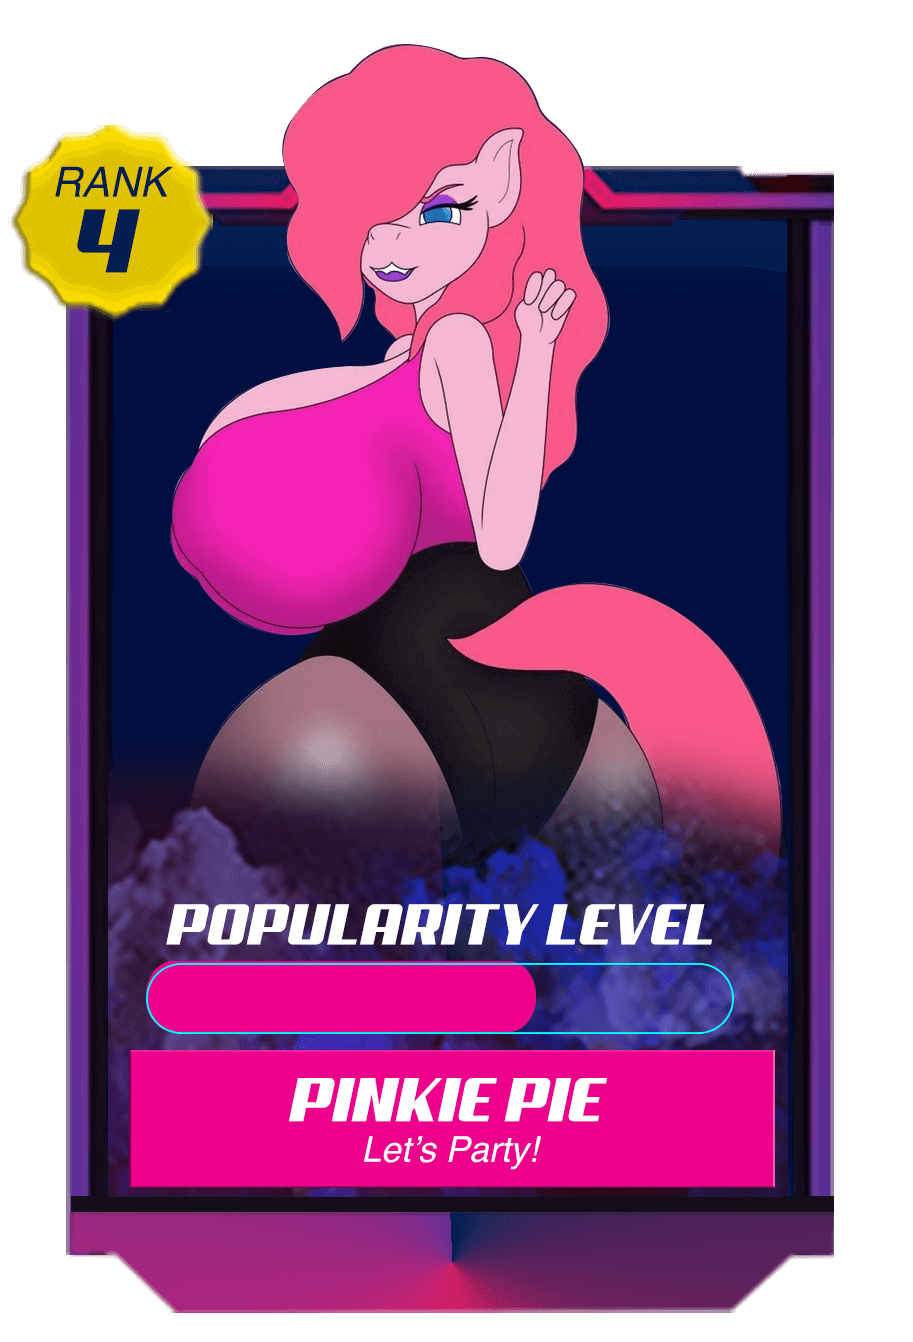 Mlp Porn Games - MLP Porn Games: Play My Little Pony Games at JerkDolls